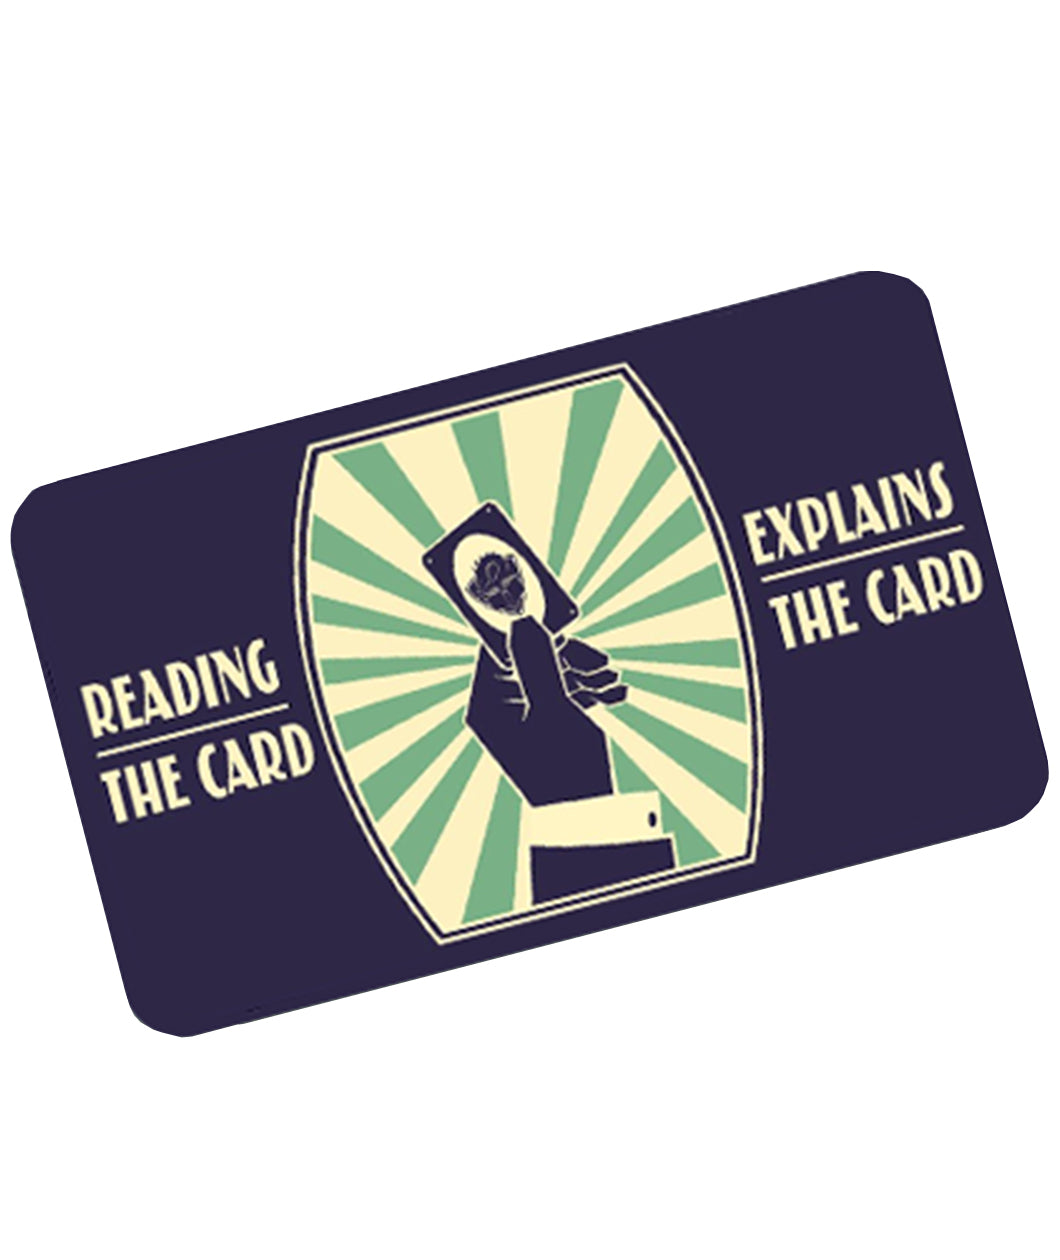 A rectangular, dark blue mousepad-like mat with rounded edges. A dark blue illustration of a hand holding up a card is centered on the mat, with rays of yellow and green emanating from the center of the image. On the left side of the illustration is the yellow text “Reading the Card” and on the right side is “Explains the Card.”